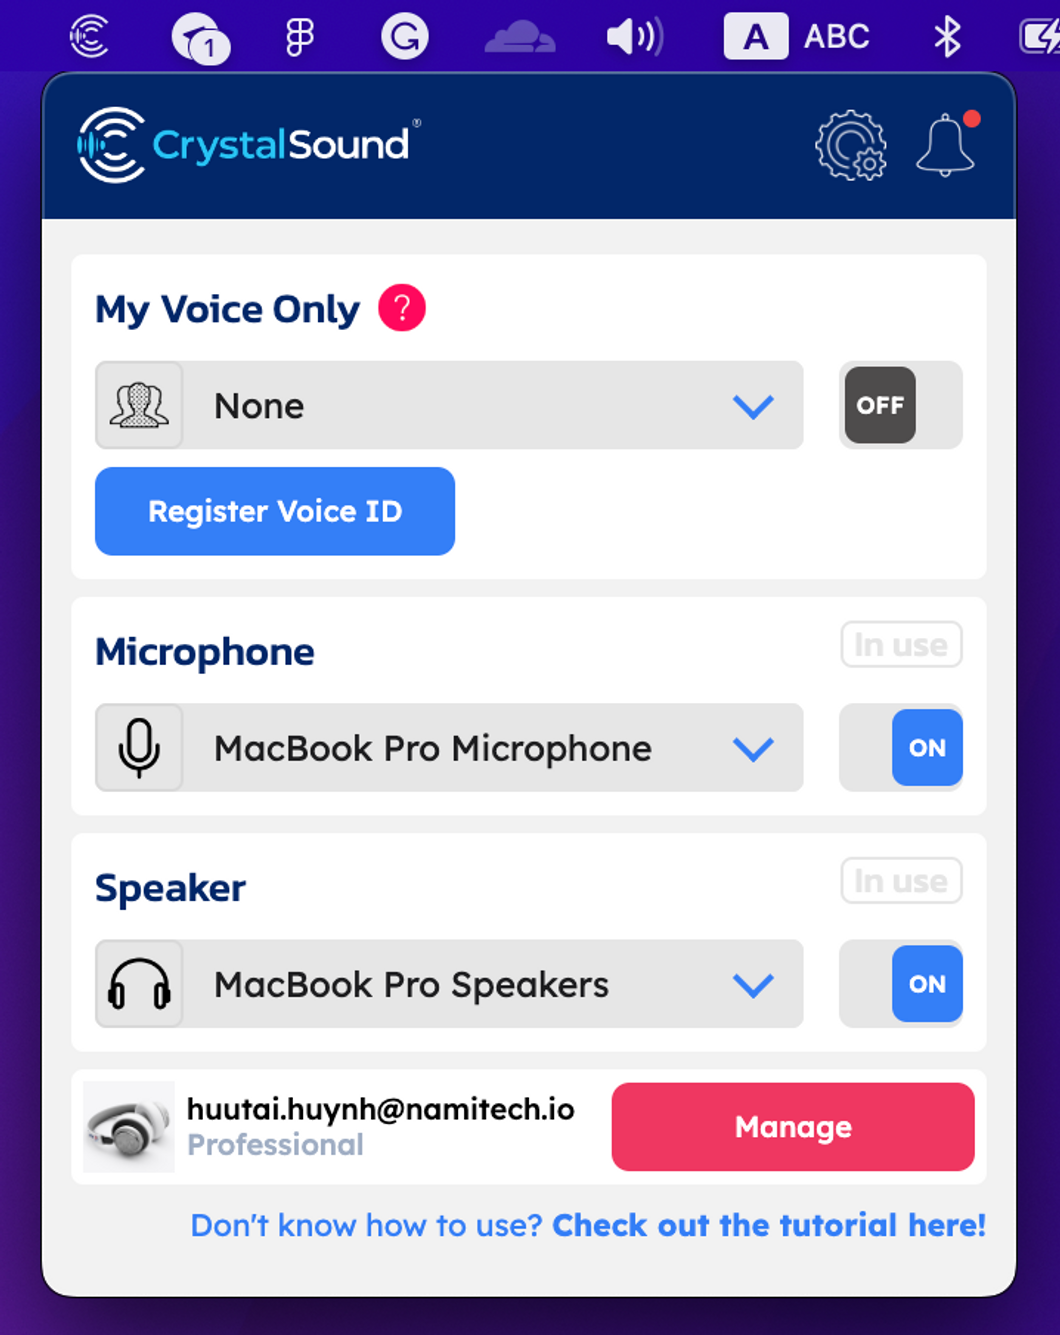 This is the home page of the CrystalSound application